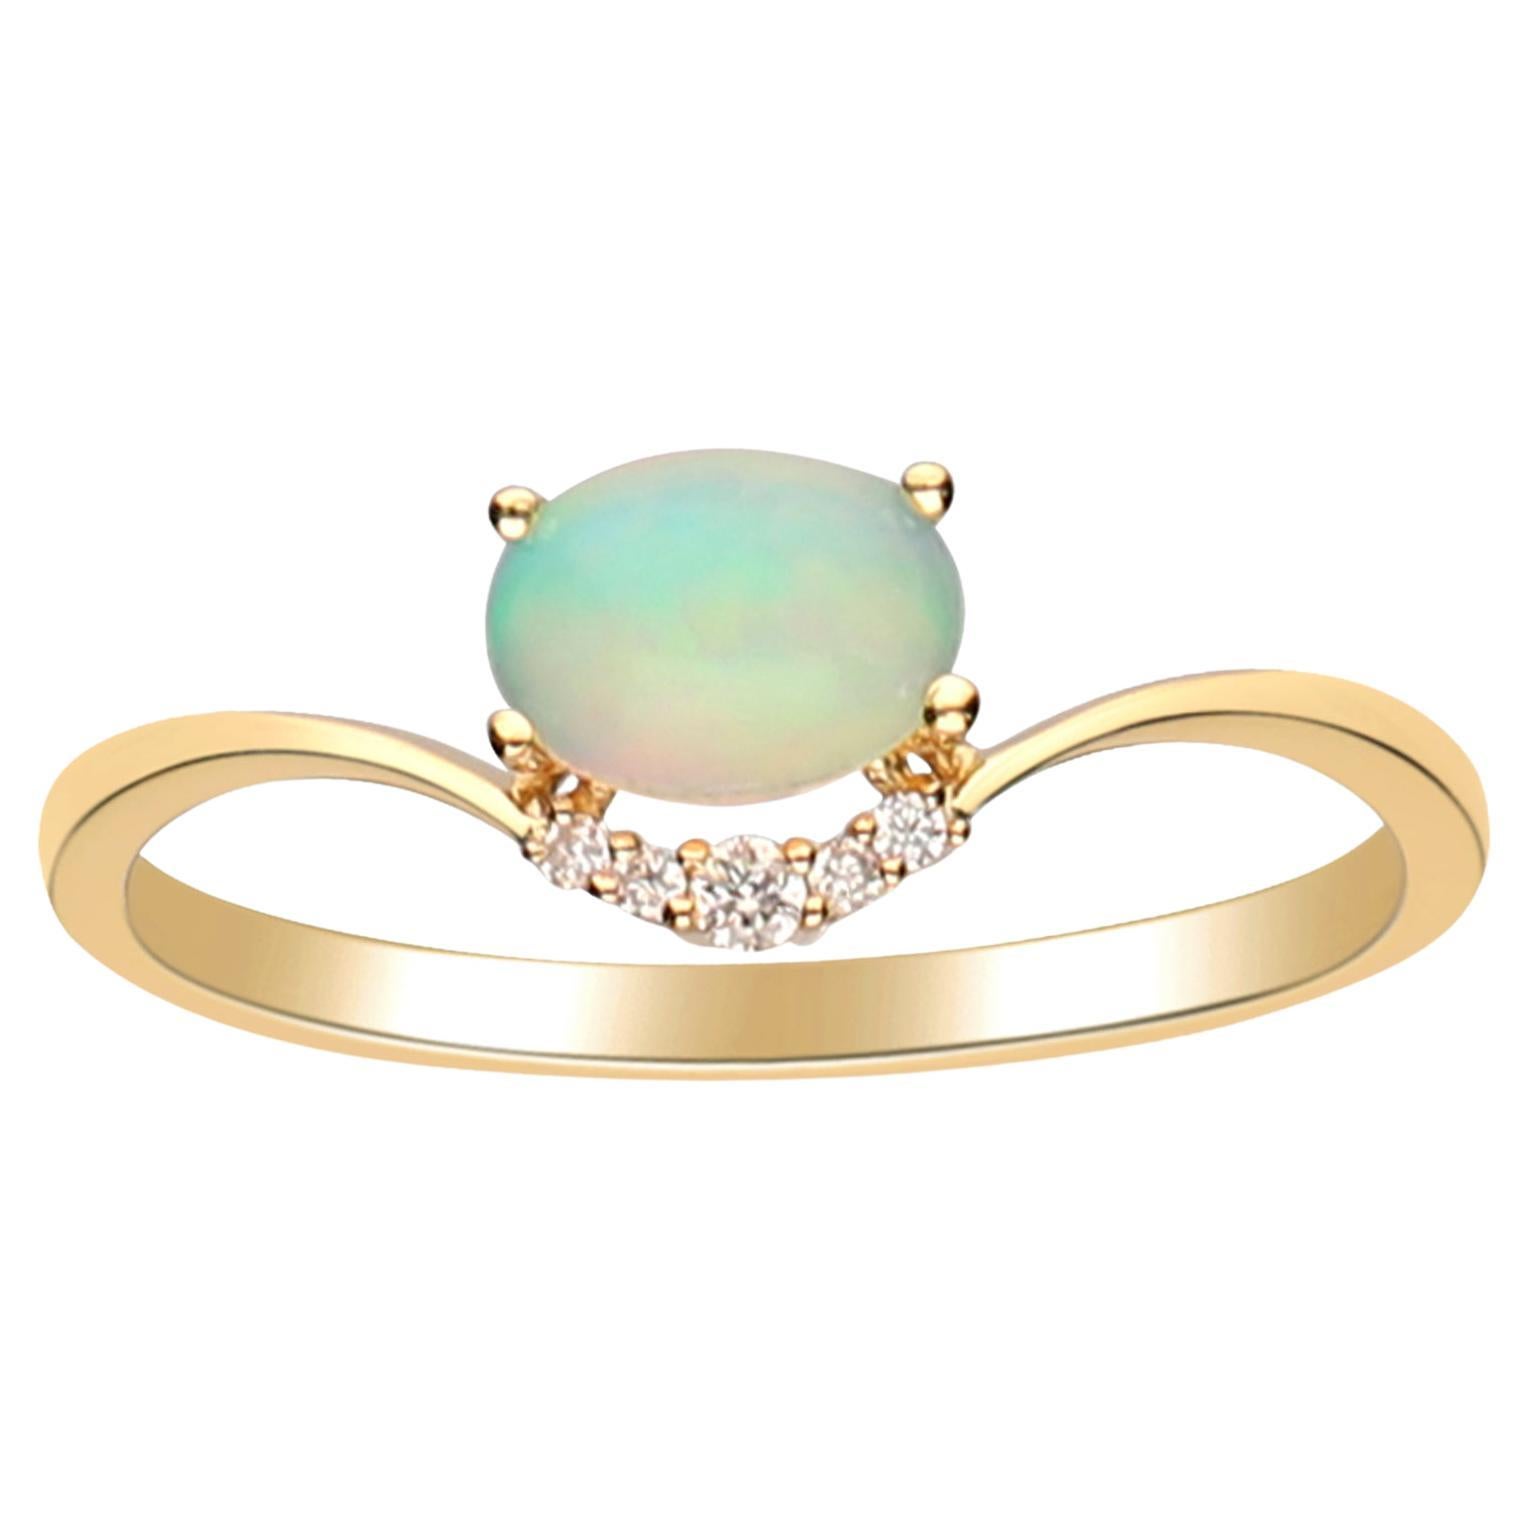 0.65 Carat Oval Cab Ethiopian Opal Diamond accents 14K Yellow Gold Ring. For Sale